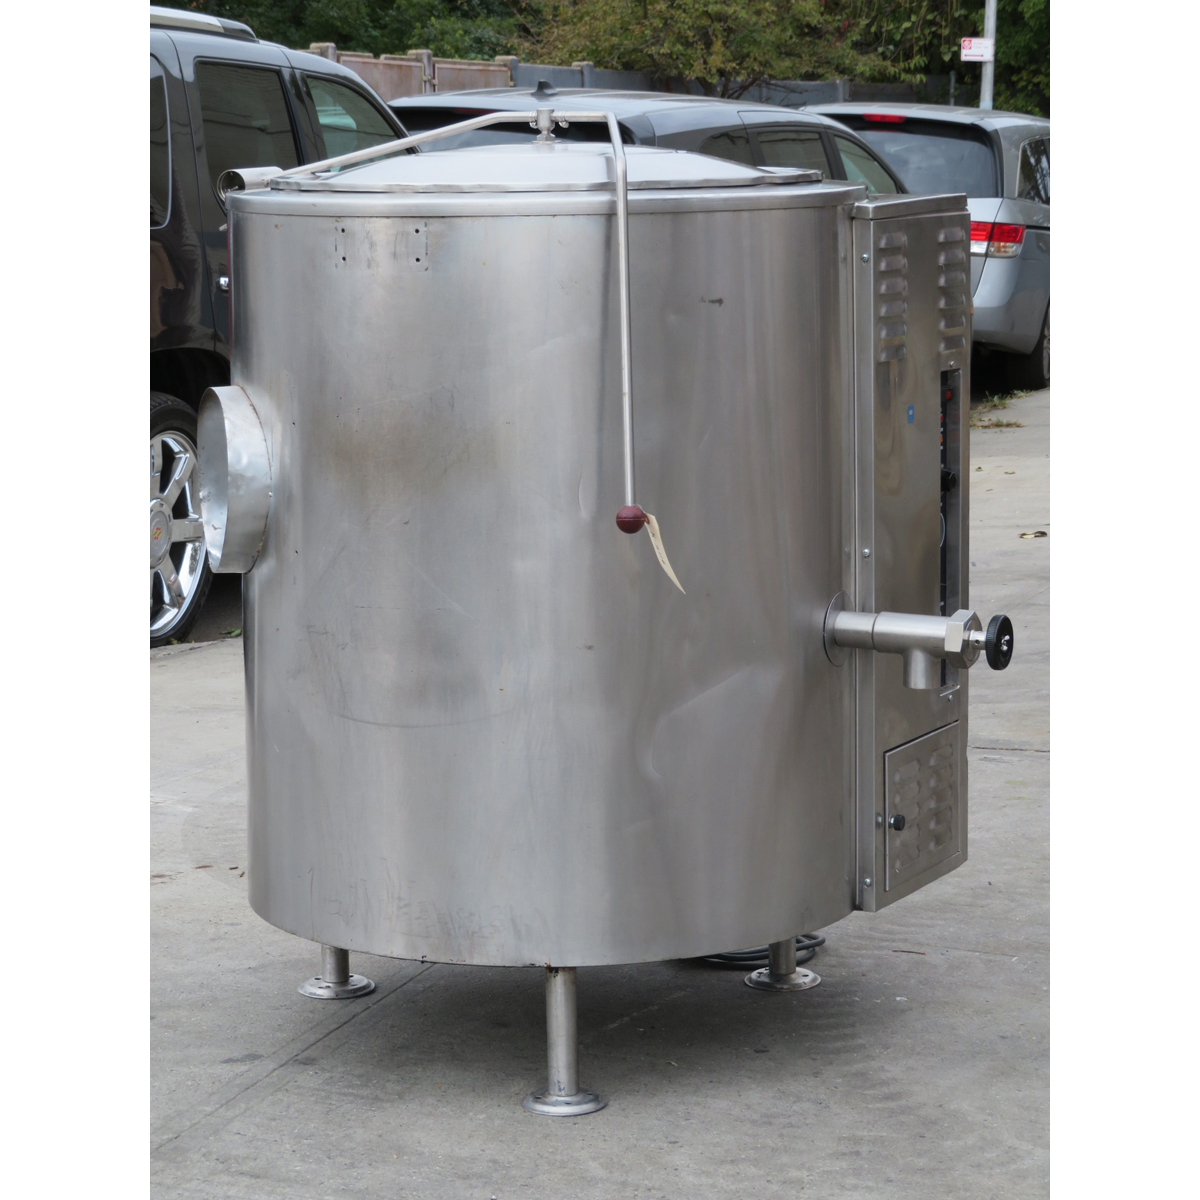 Southbend KSLG-60 Gas Steam Jacketed Kettle 60 Gallon, Used Great Condition image 1